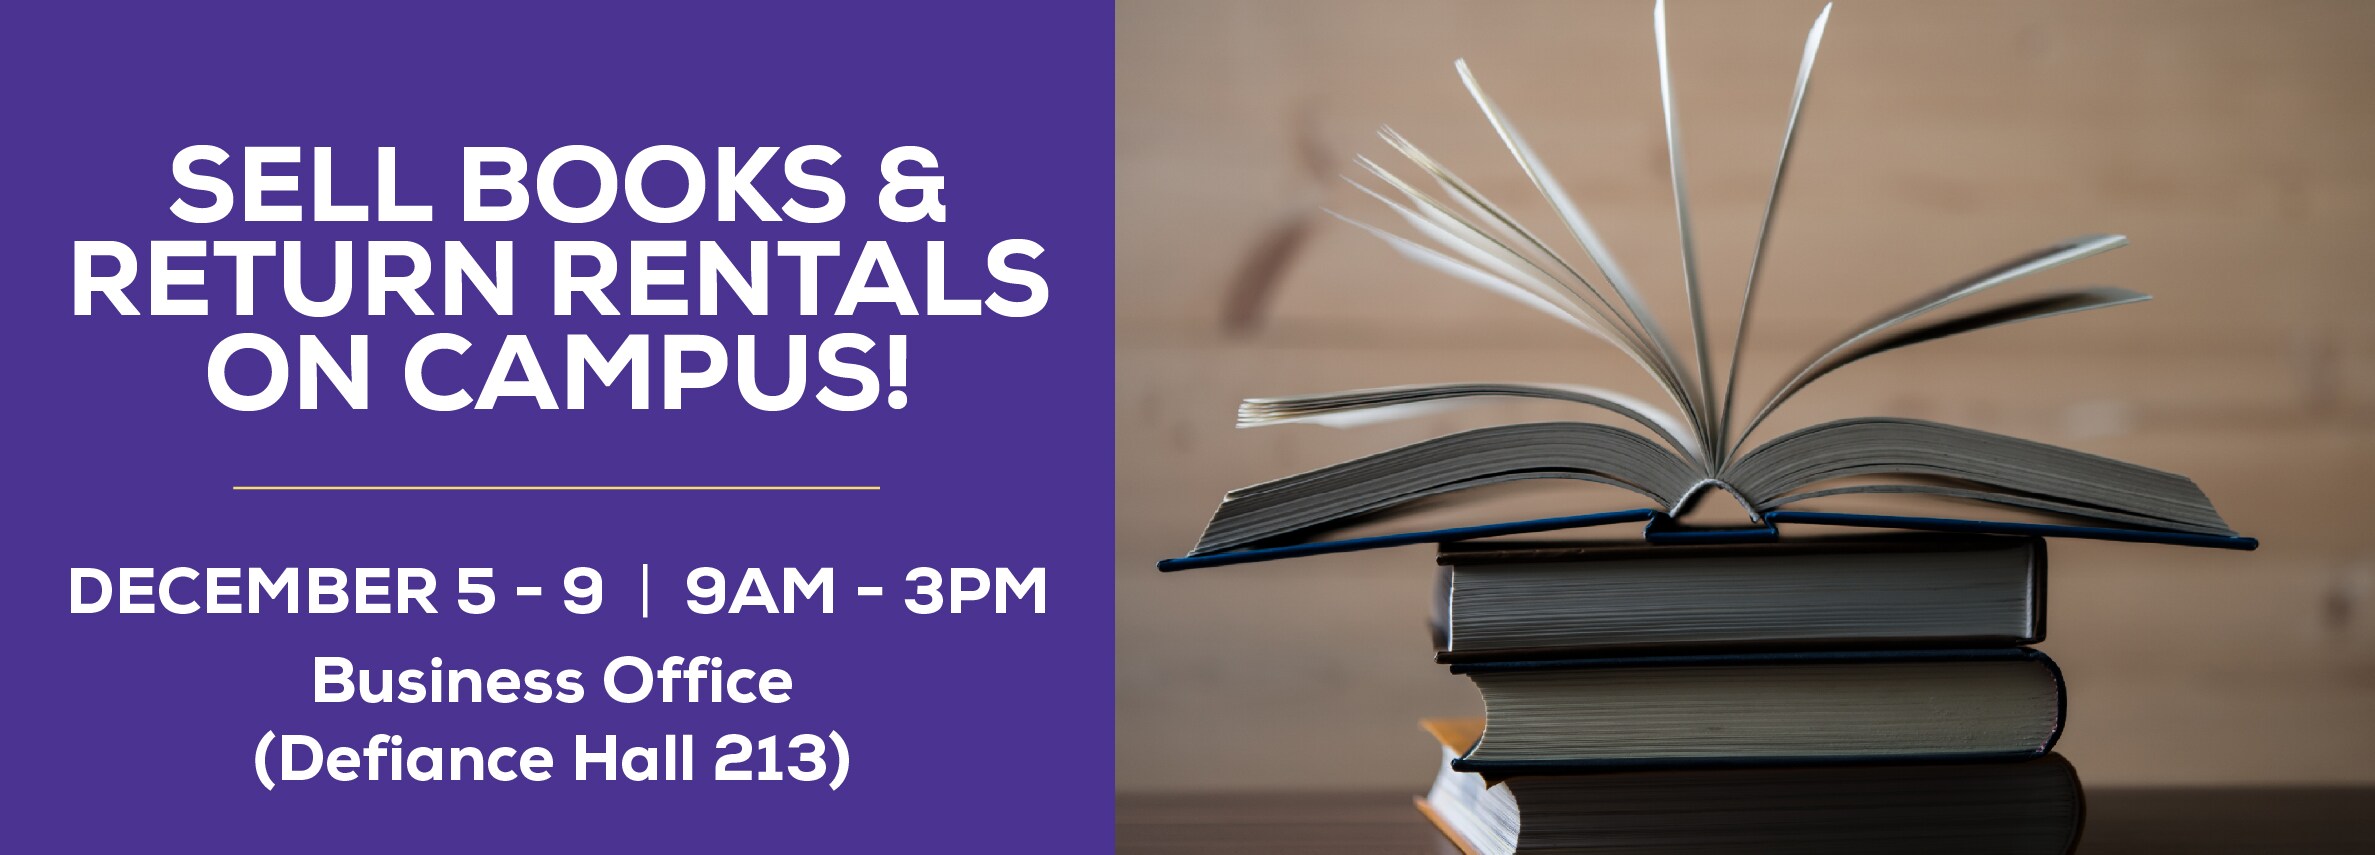 Sell books and return rentals on campus! December 5th through 9th. 9am to 3pm at the Business Office. Defiance Hall 213.